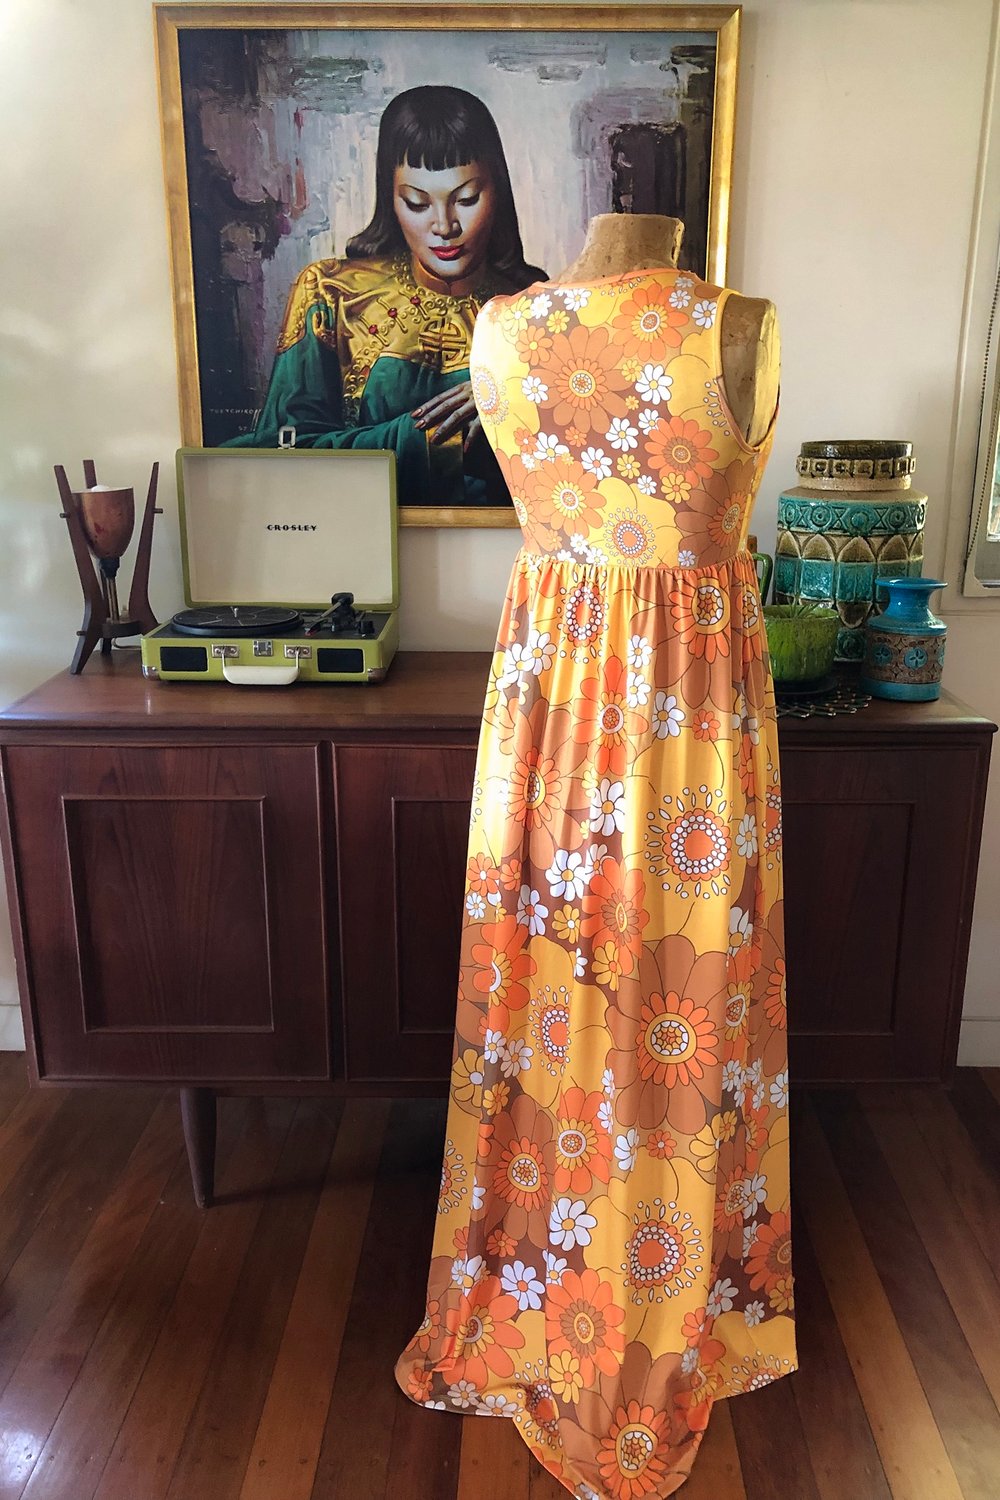 Baby doll maxi dress in Pushing daisies Orange and brown print 